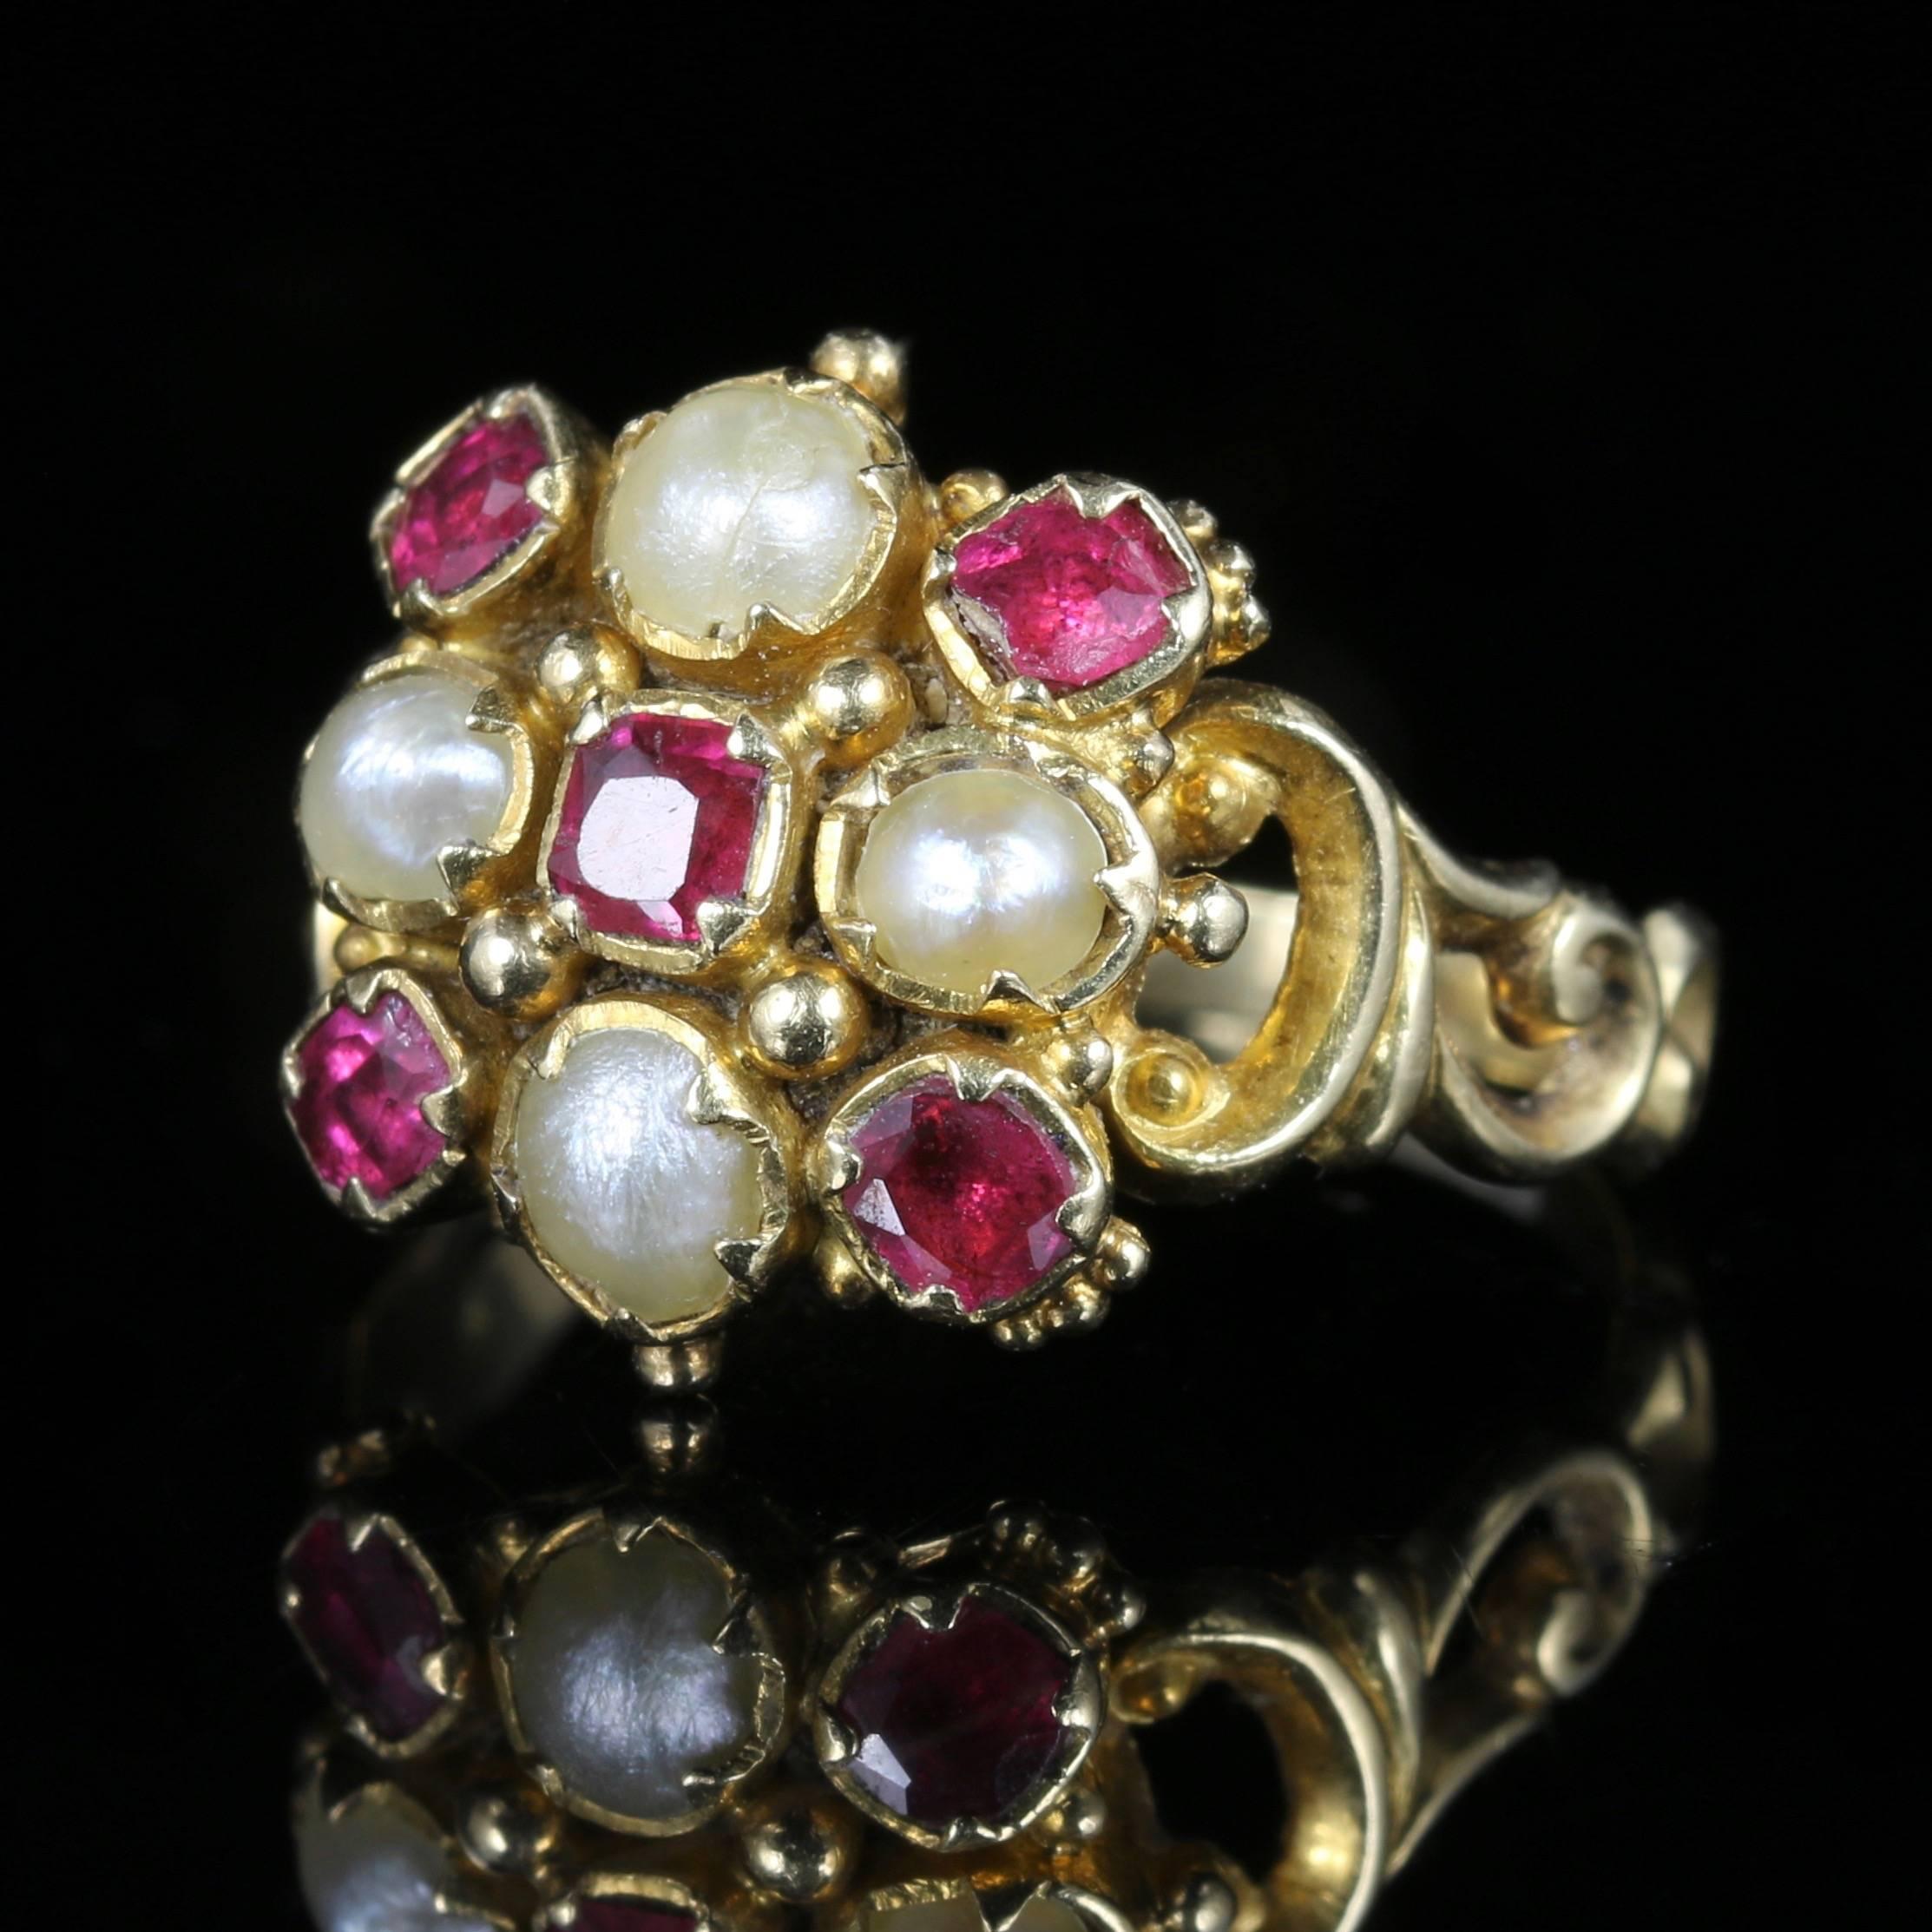 This is a stunning Georgian 18ct yellow Gold Antique ring set with fabulous Georgian workmanship of its time, all original to the gallery and shank.

Circa 1800

The ring is set with beautiful Rubies and natural Pearls.

Pearls have a wonderful